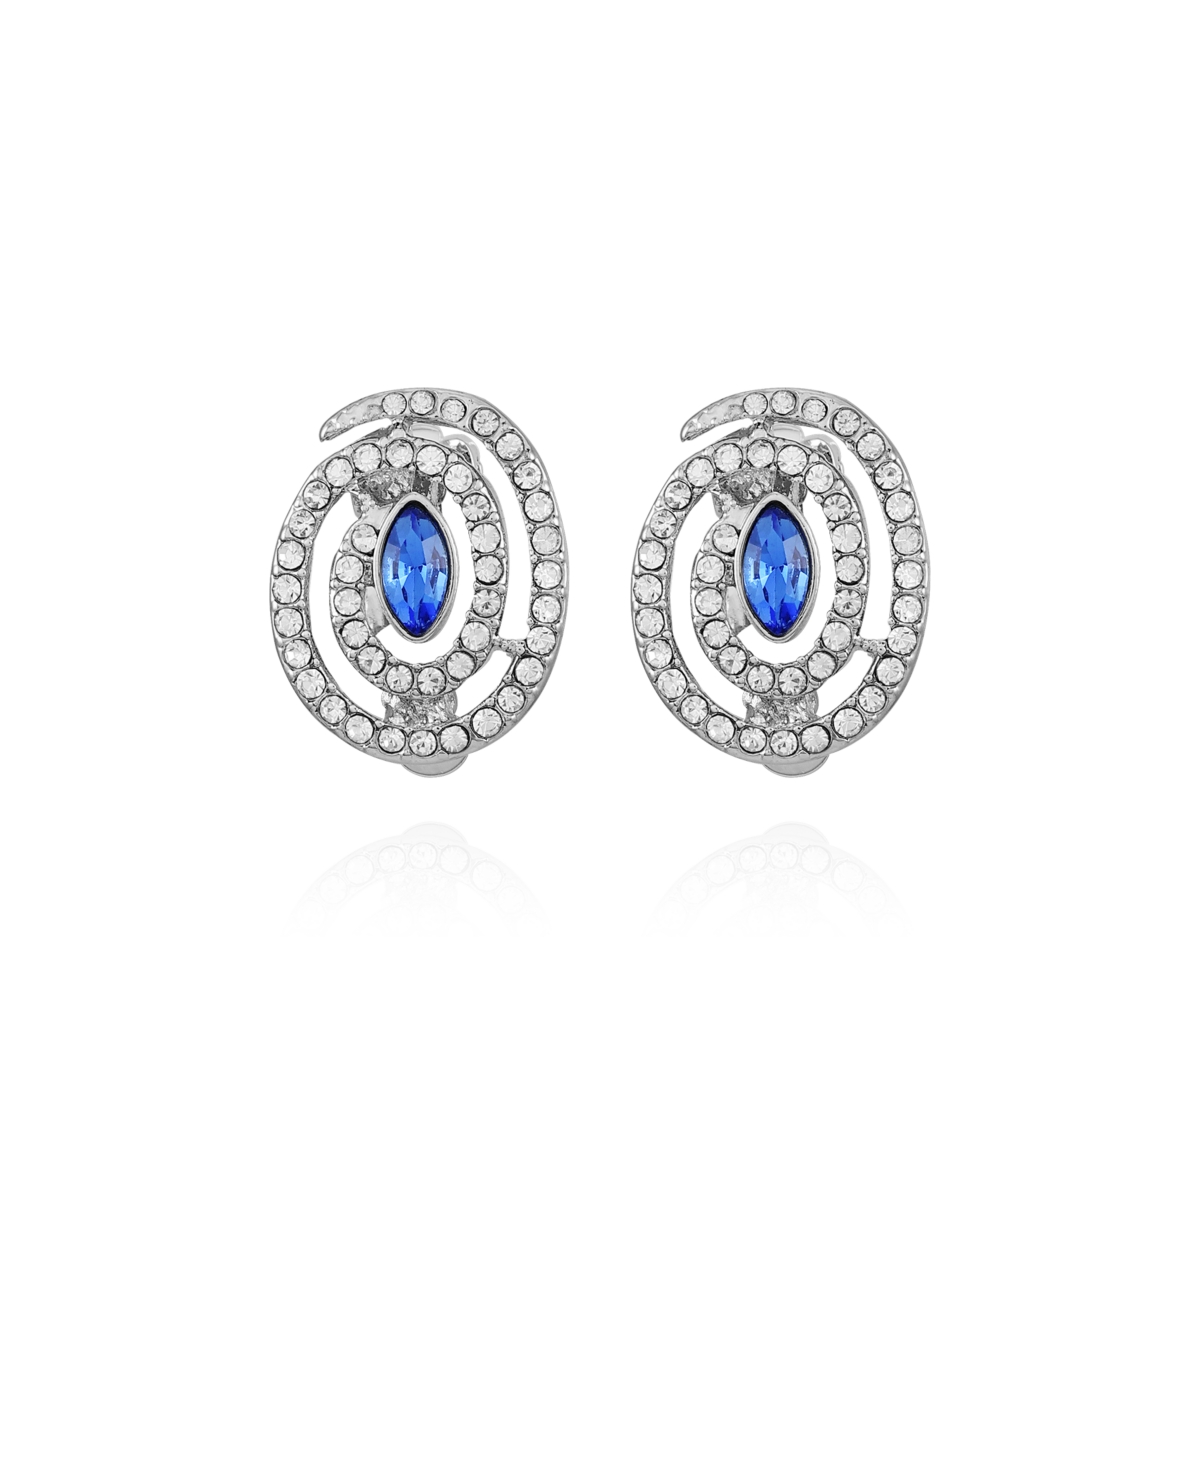 T Tahari Silver-tone Sparkling Spiral Stud Clip-on Earrings